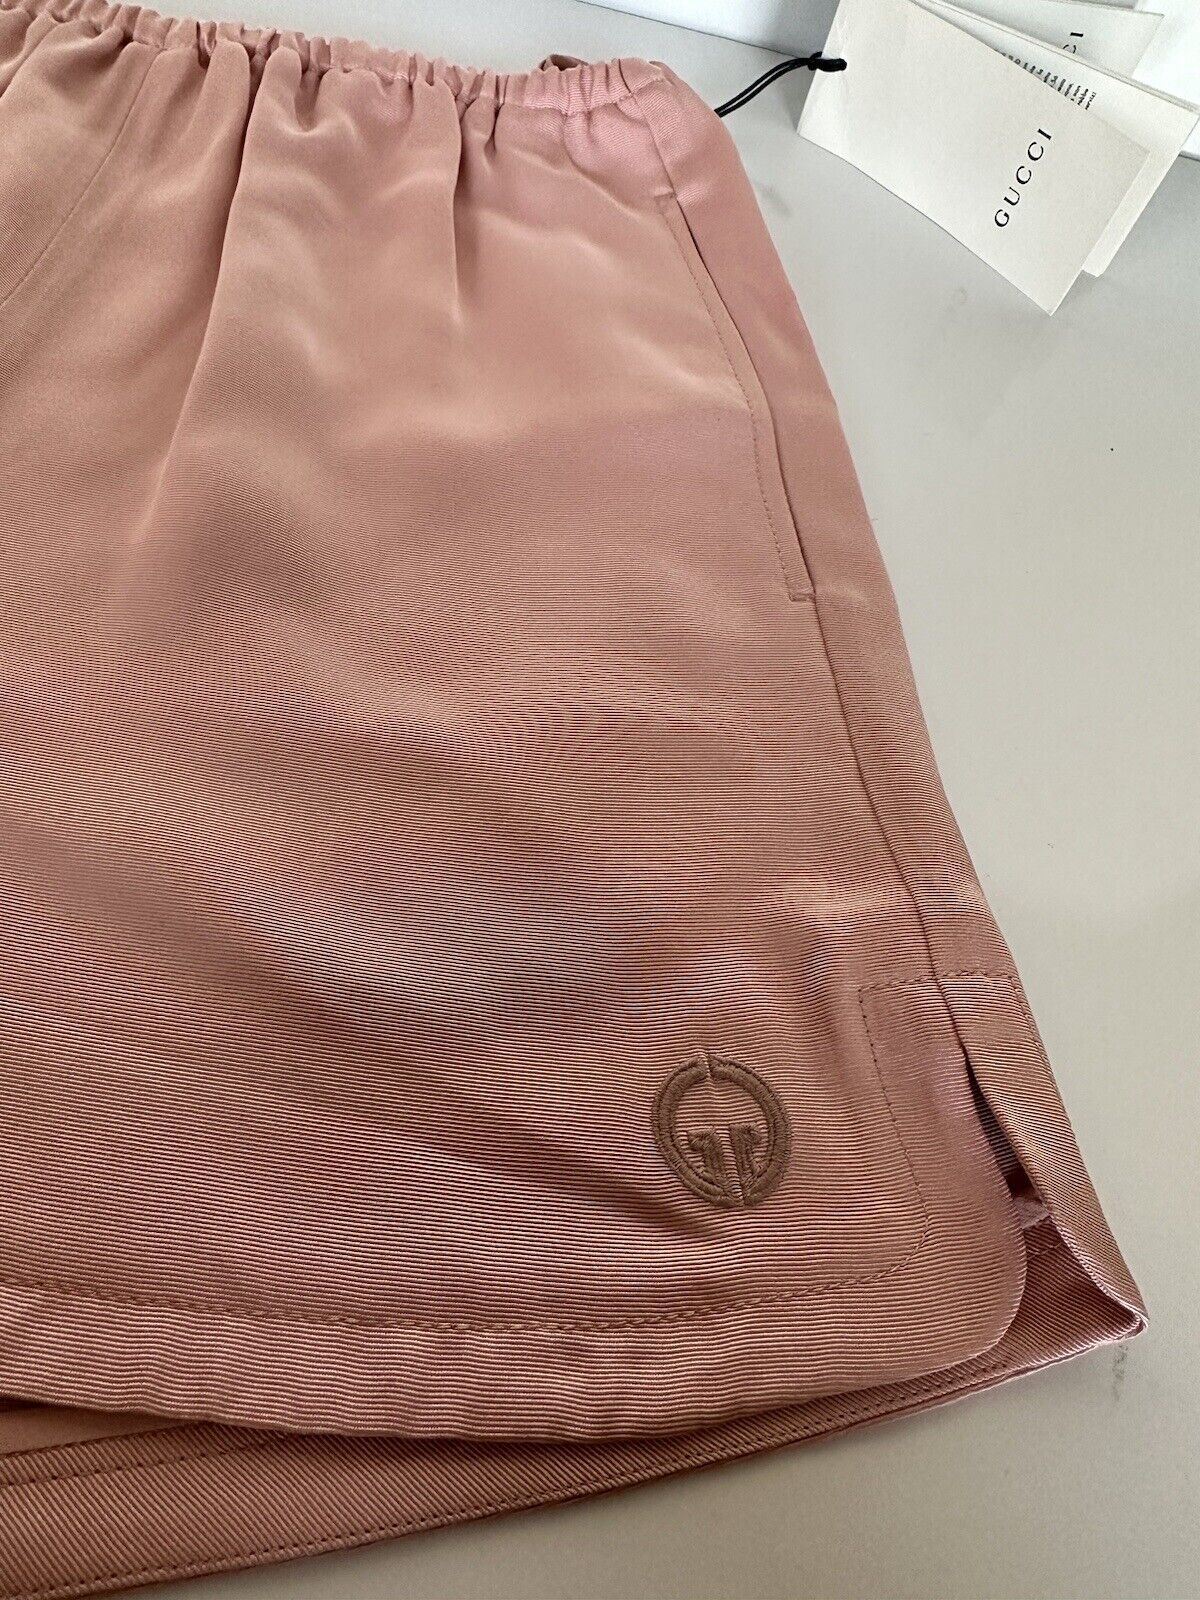 NWT Gucci Women's Silk/Viscose Shorts Iced Pink 36 (XS) 625238 Made in Italy